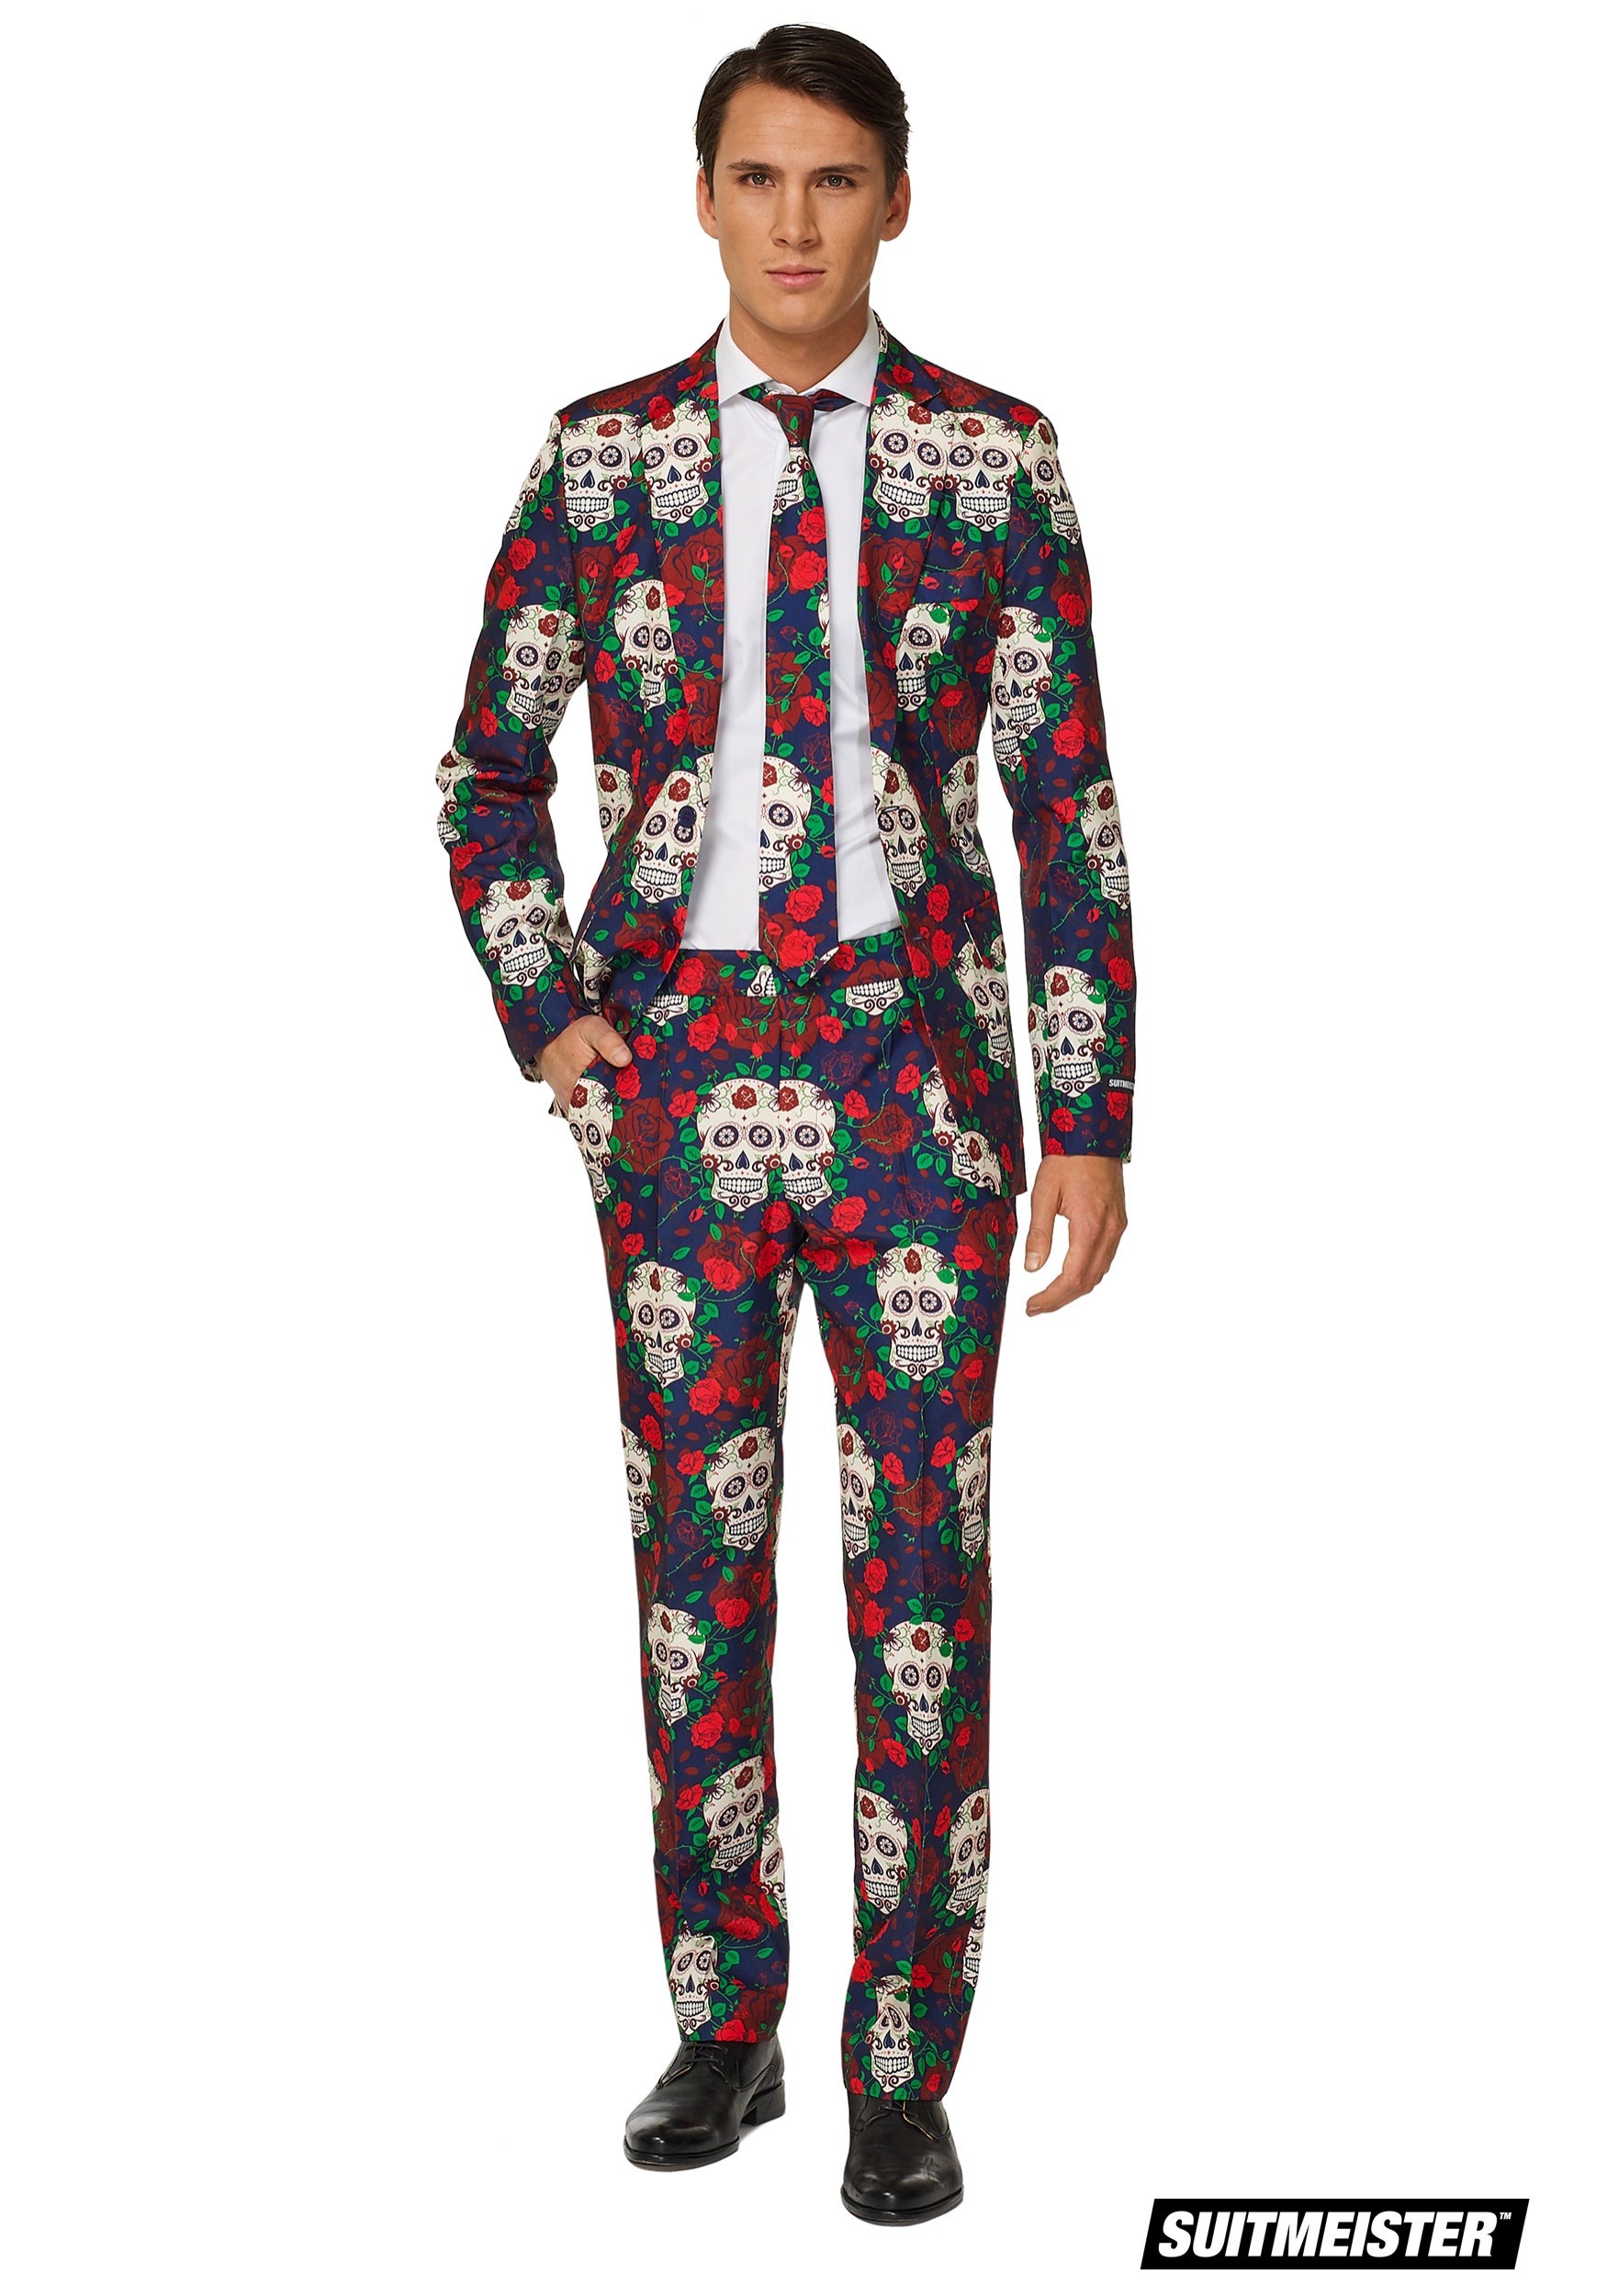 Men’s Day of the Dead Suitmeister Suit Costume